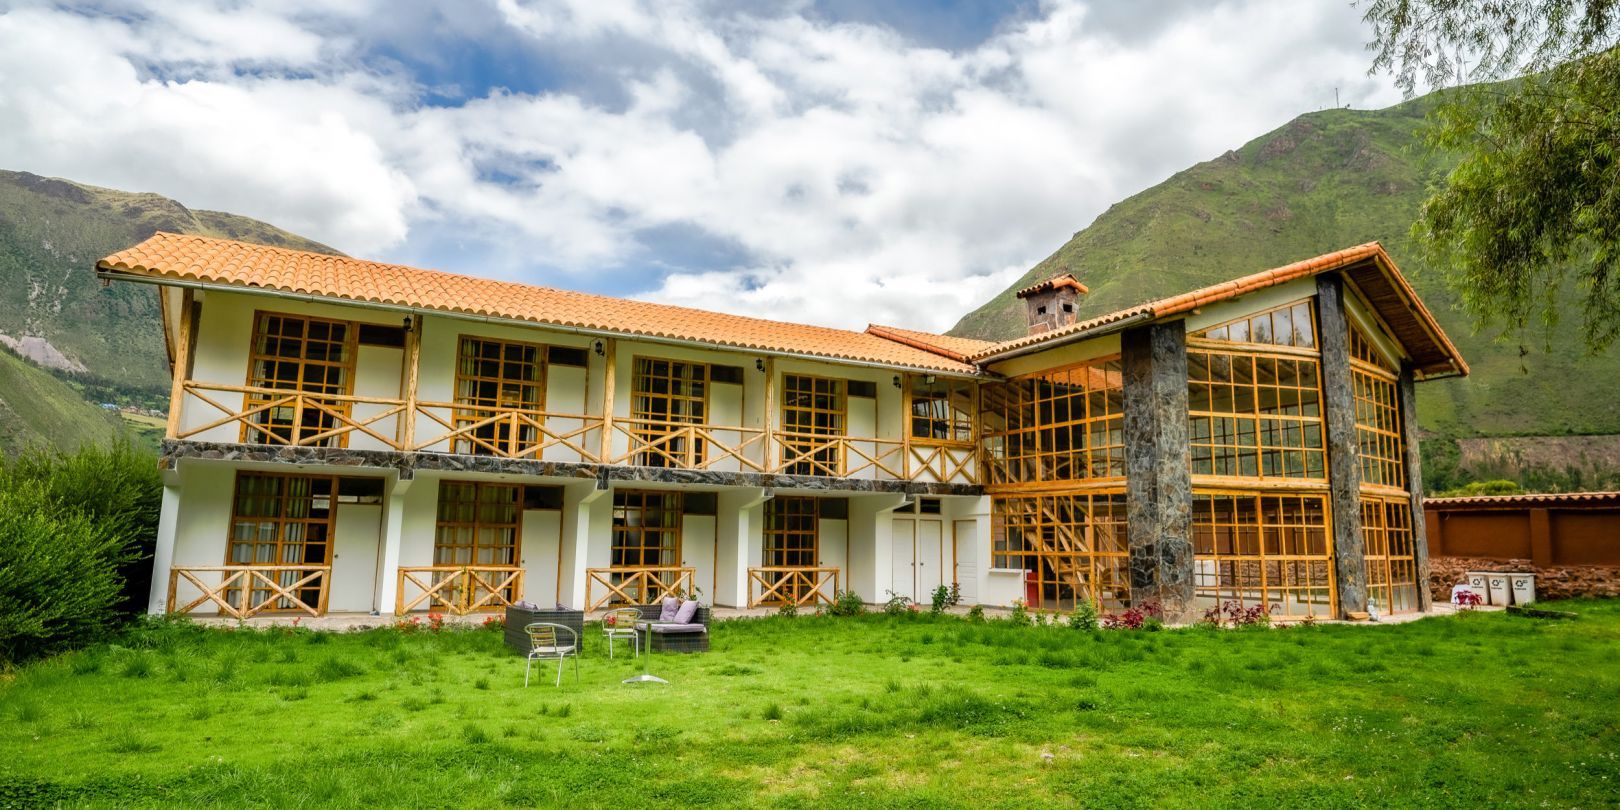 Our place in the Sacred Valley